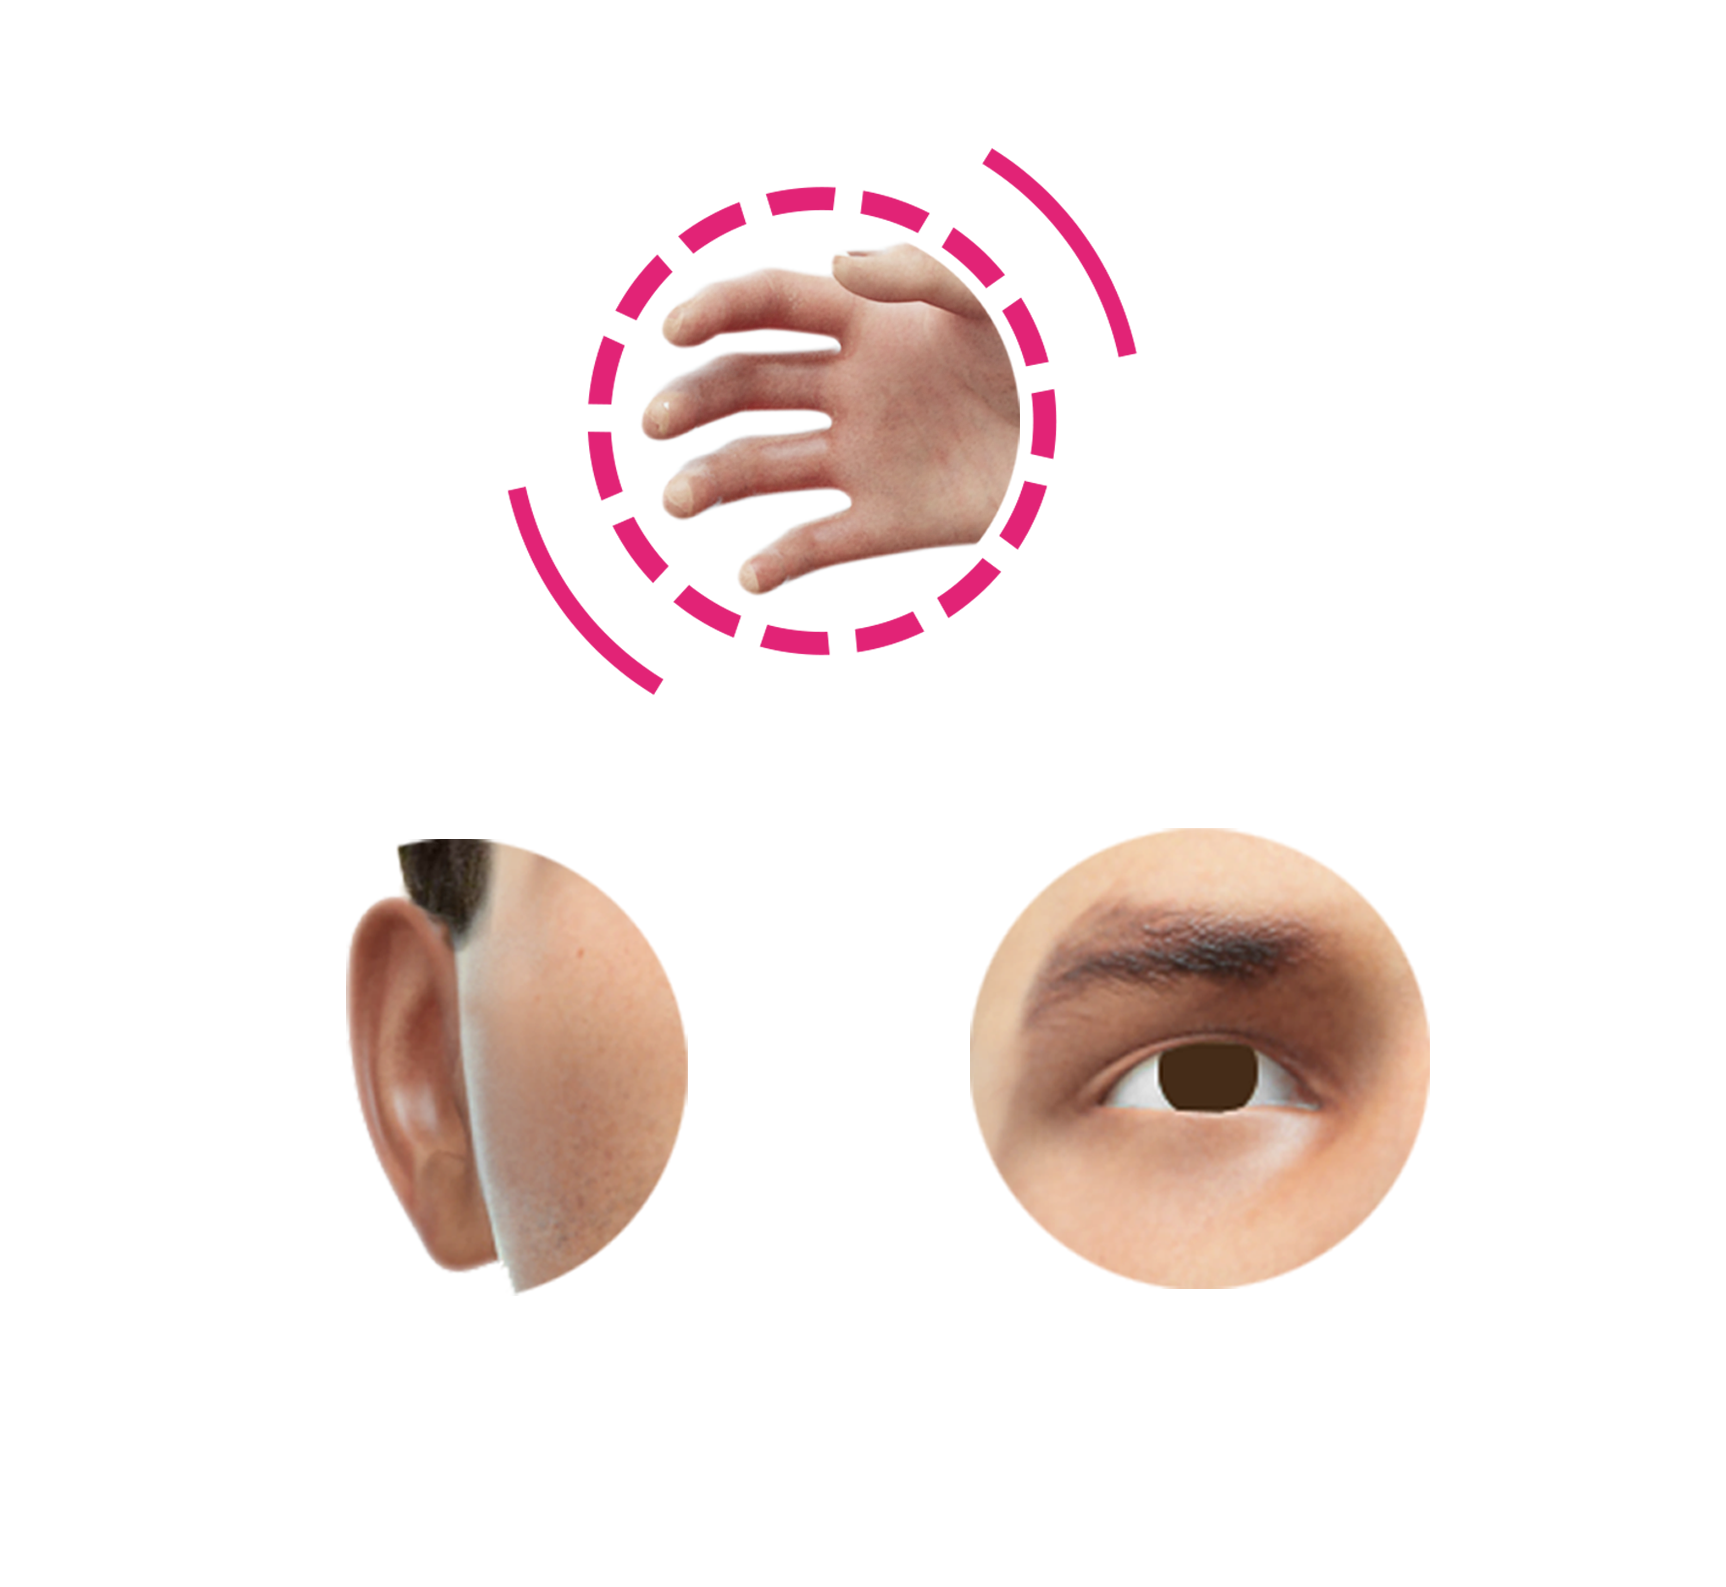 Hand, ear and eye as examples for haptic codecs